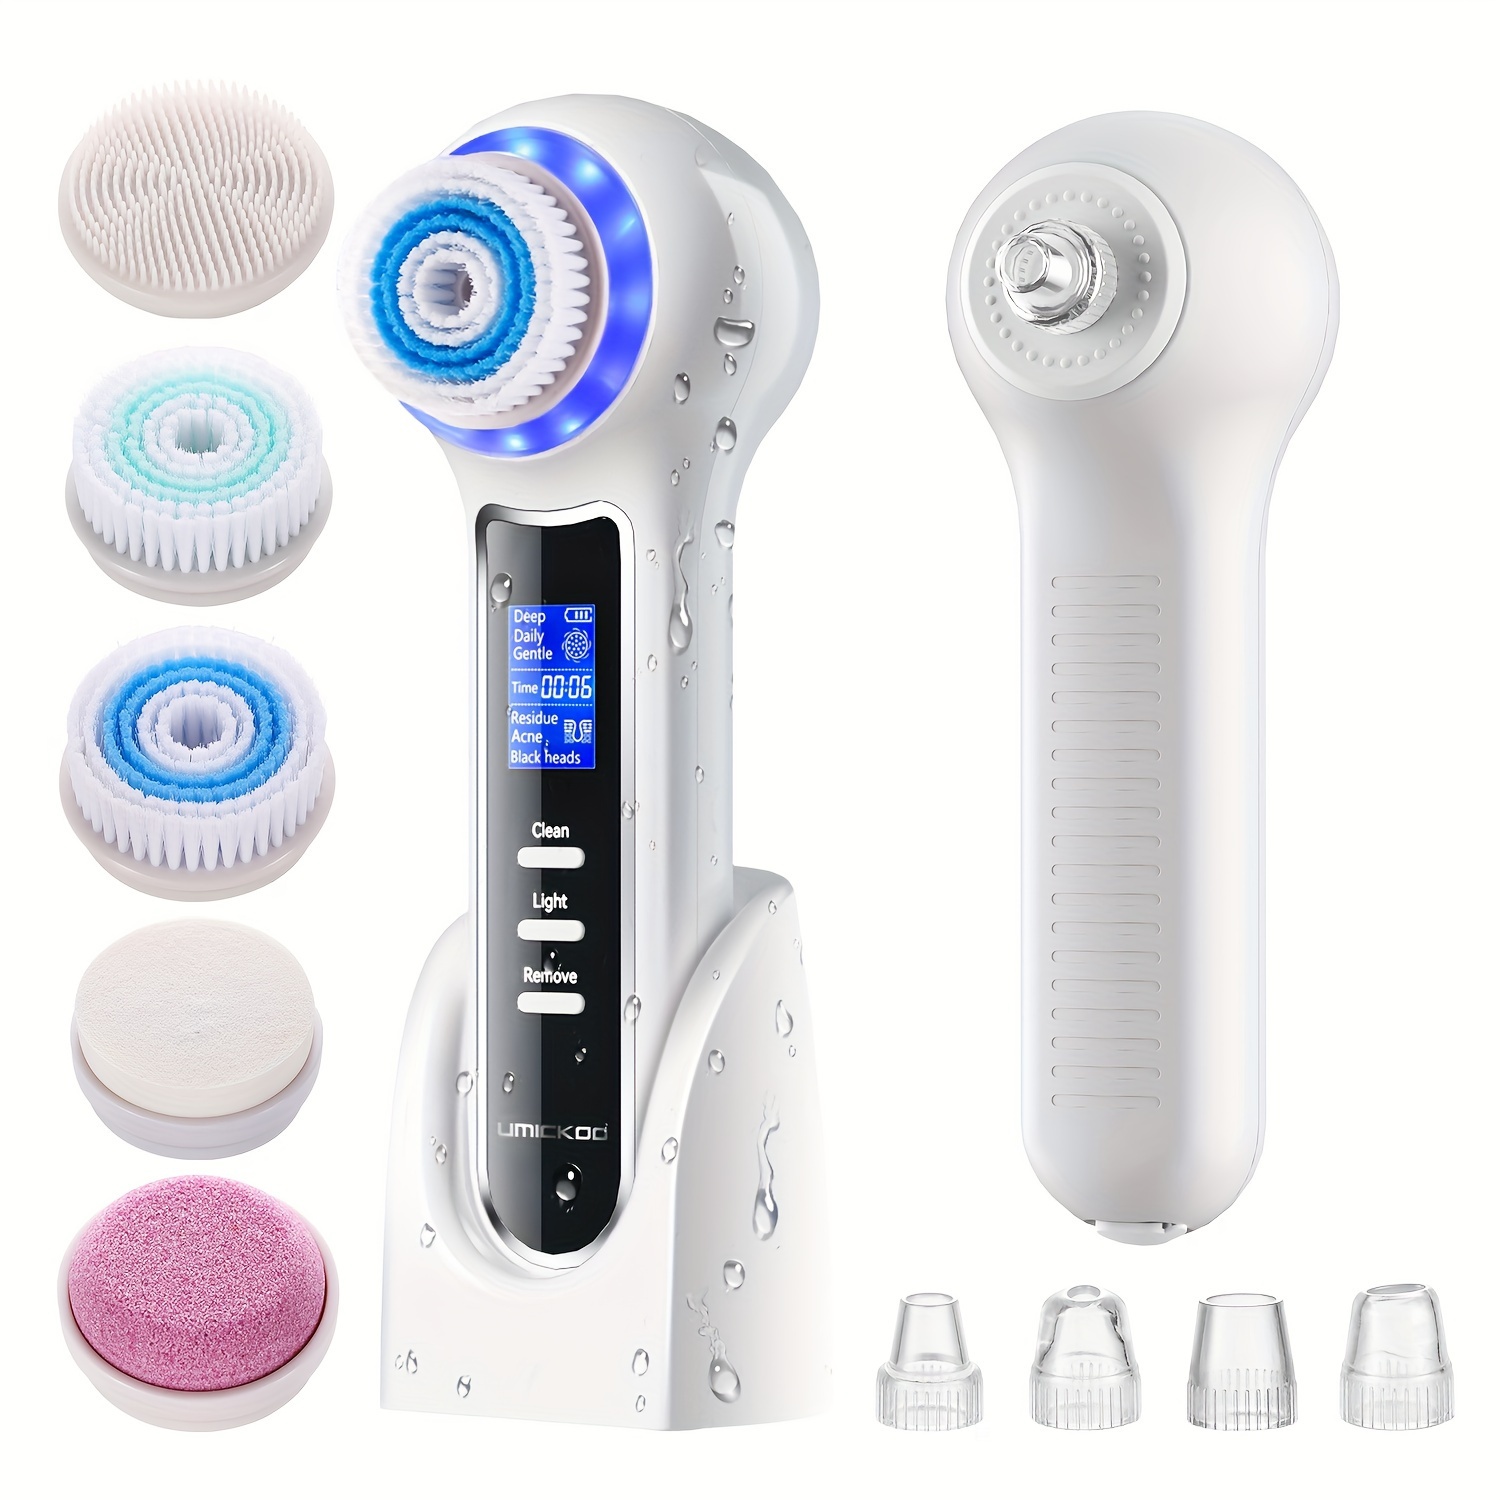 

Umickoo Scrubber Exfoliator With Lcd Screen Rechargeable Facial Cleansing Brush Ipx7 Waterproof 3 In 1 Remover Vacuum For Exfoliating Deep Pore Cleansing